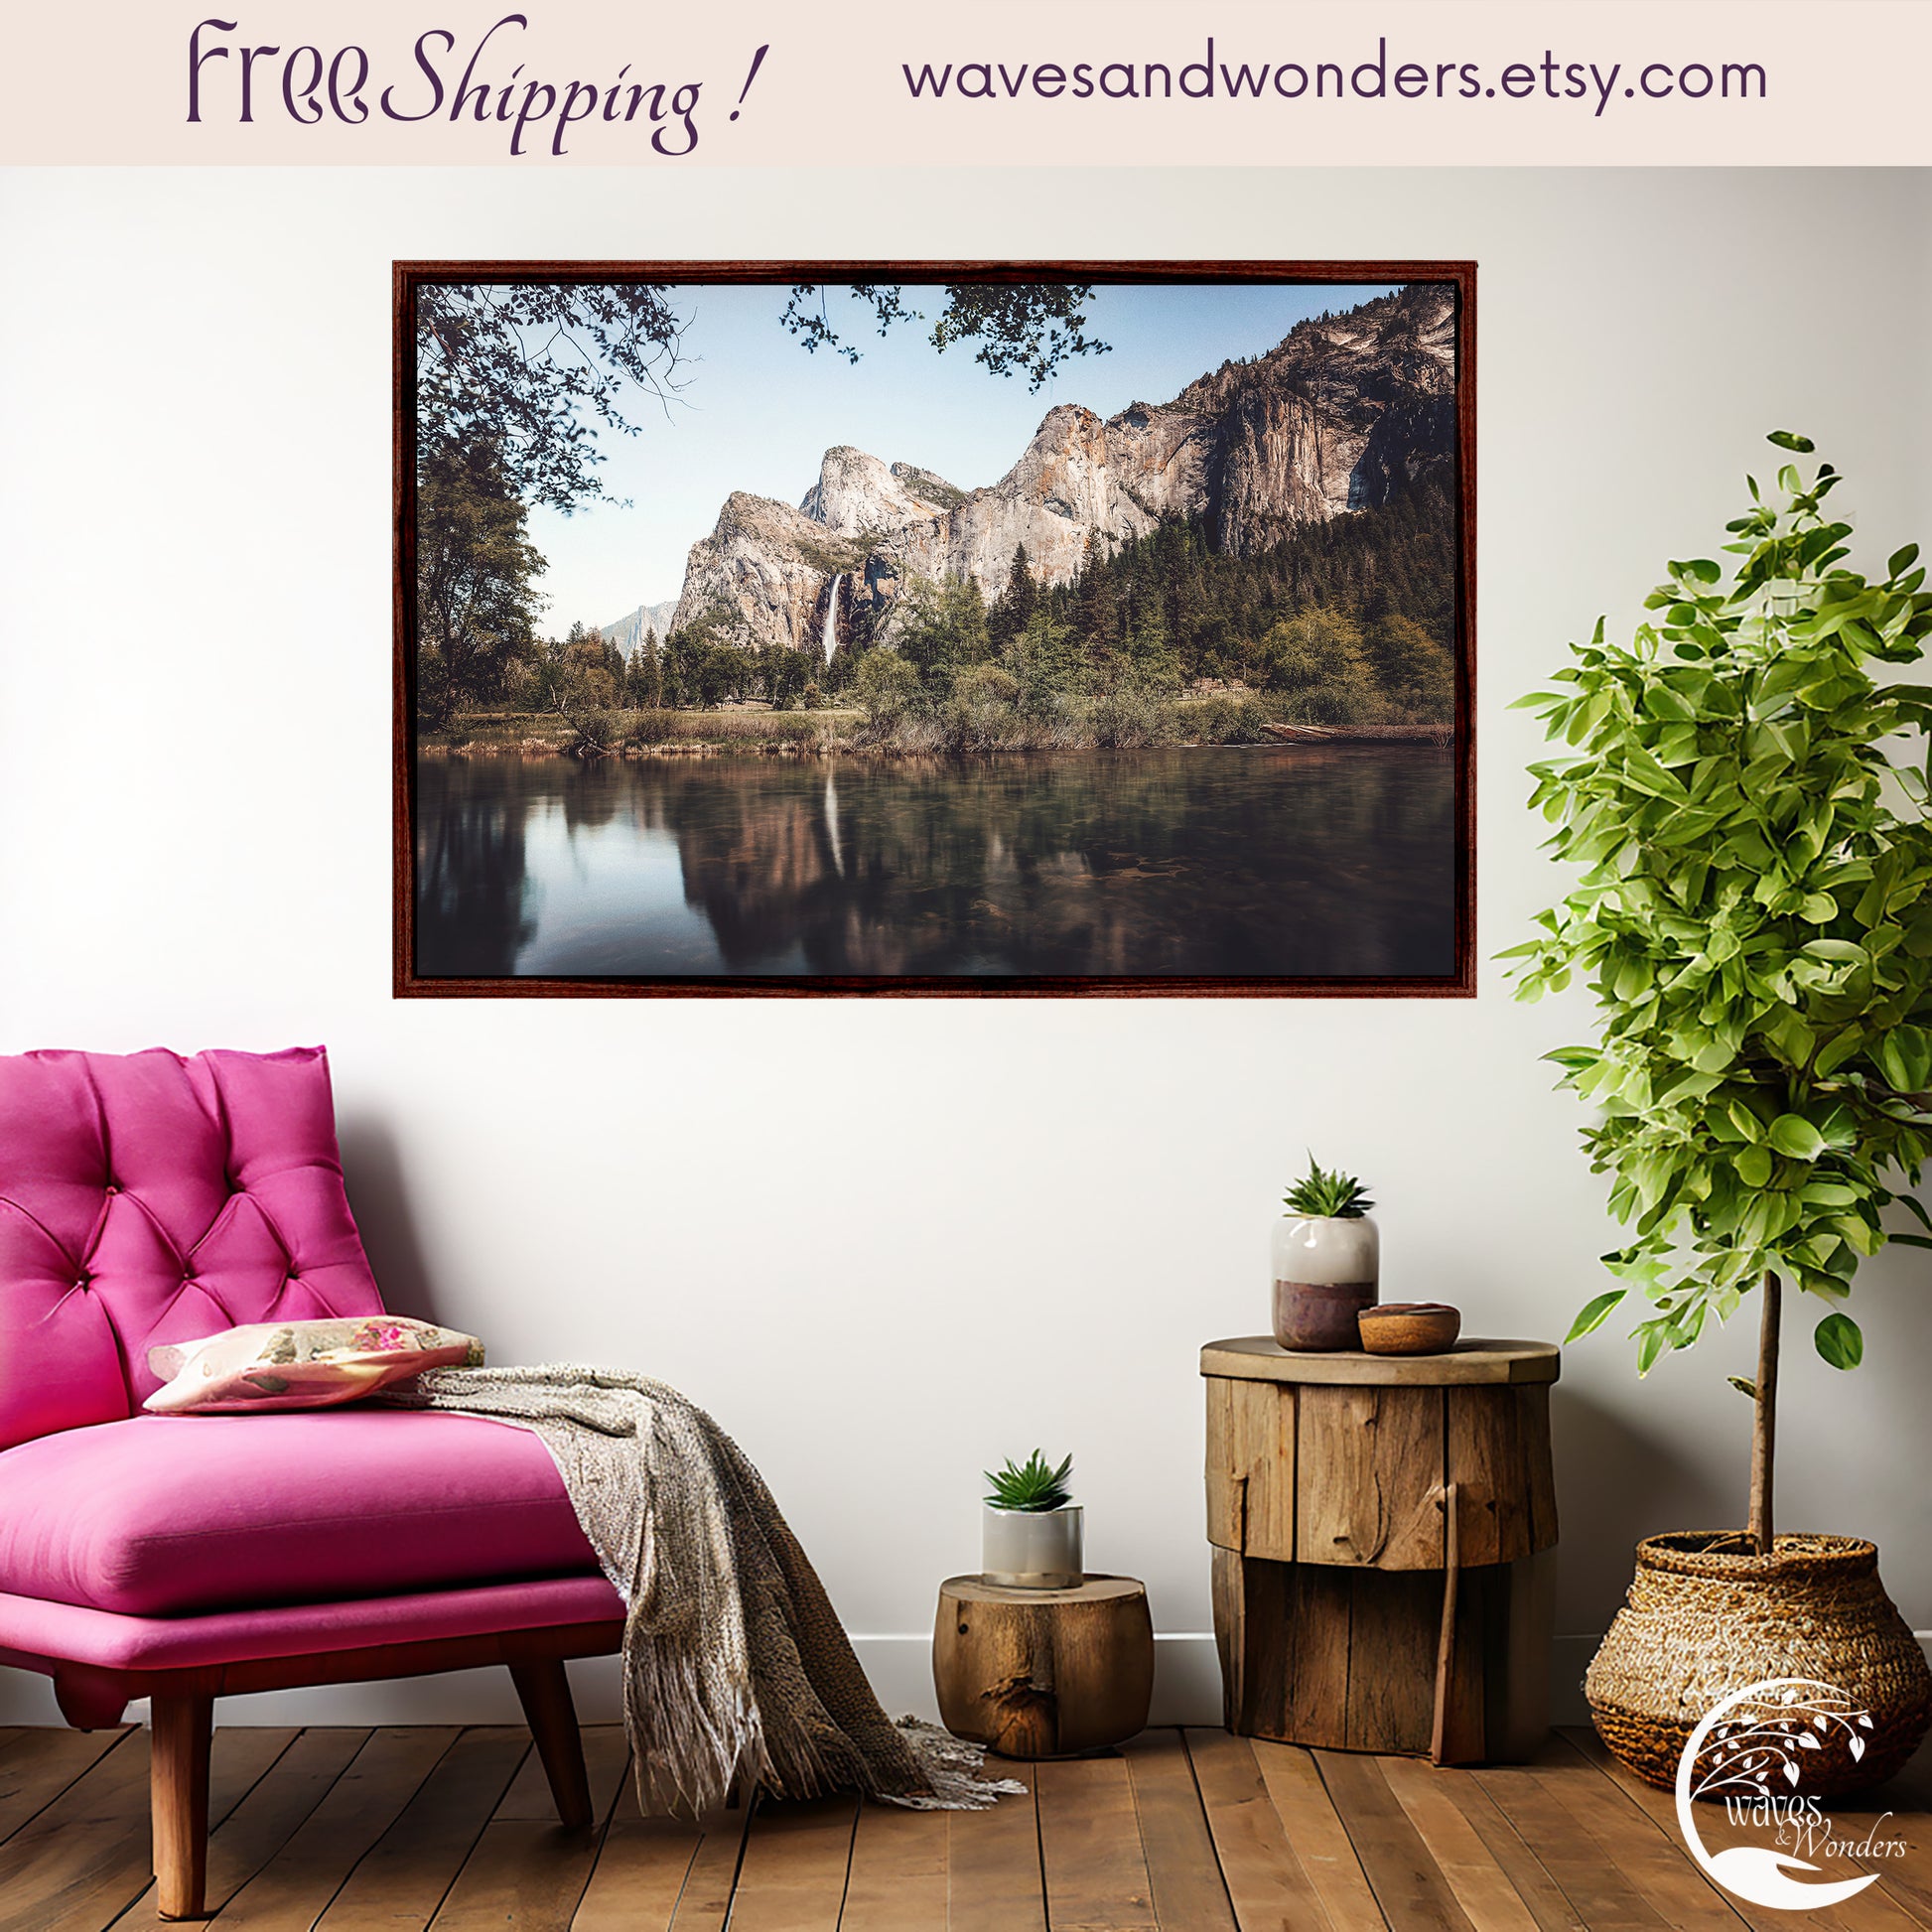 a pink chair sitting in front of a picture of mountains